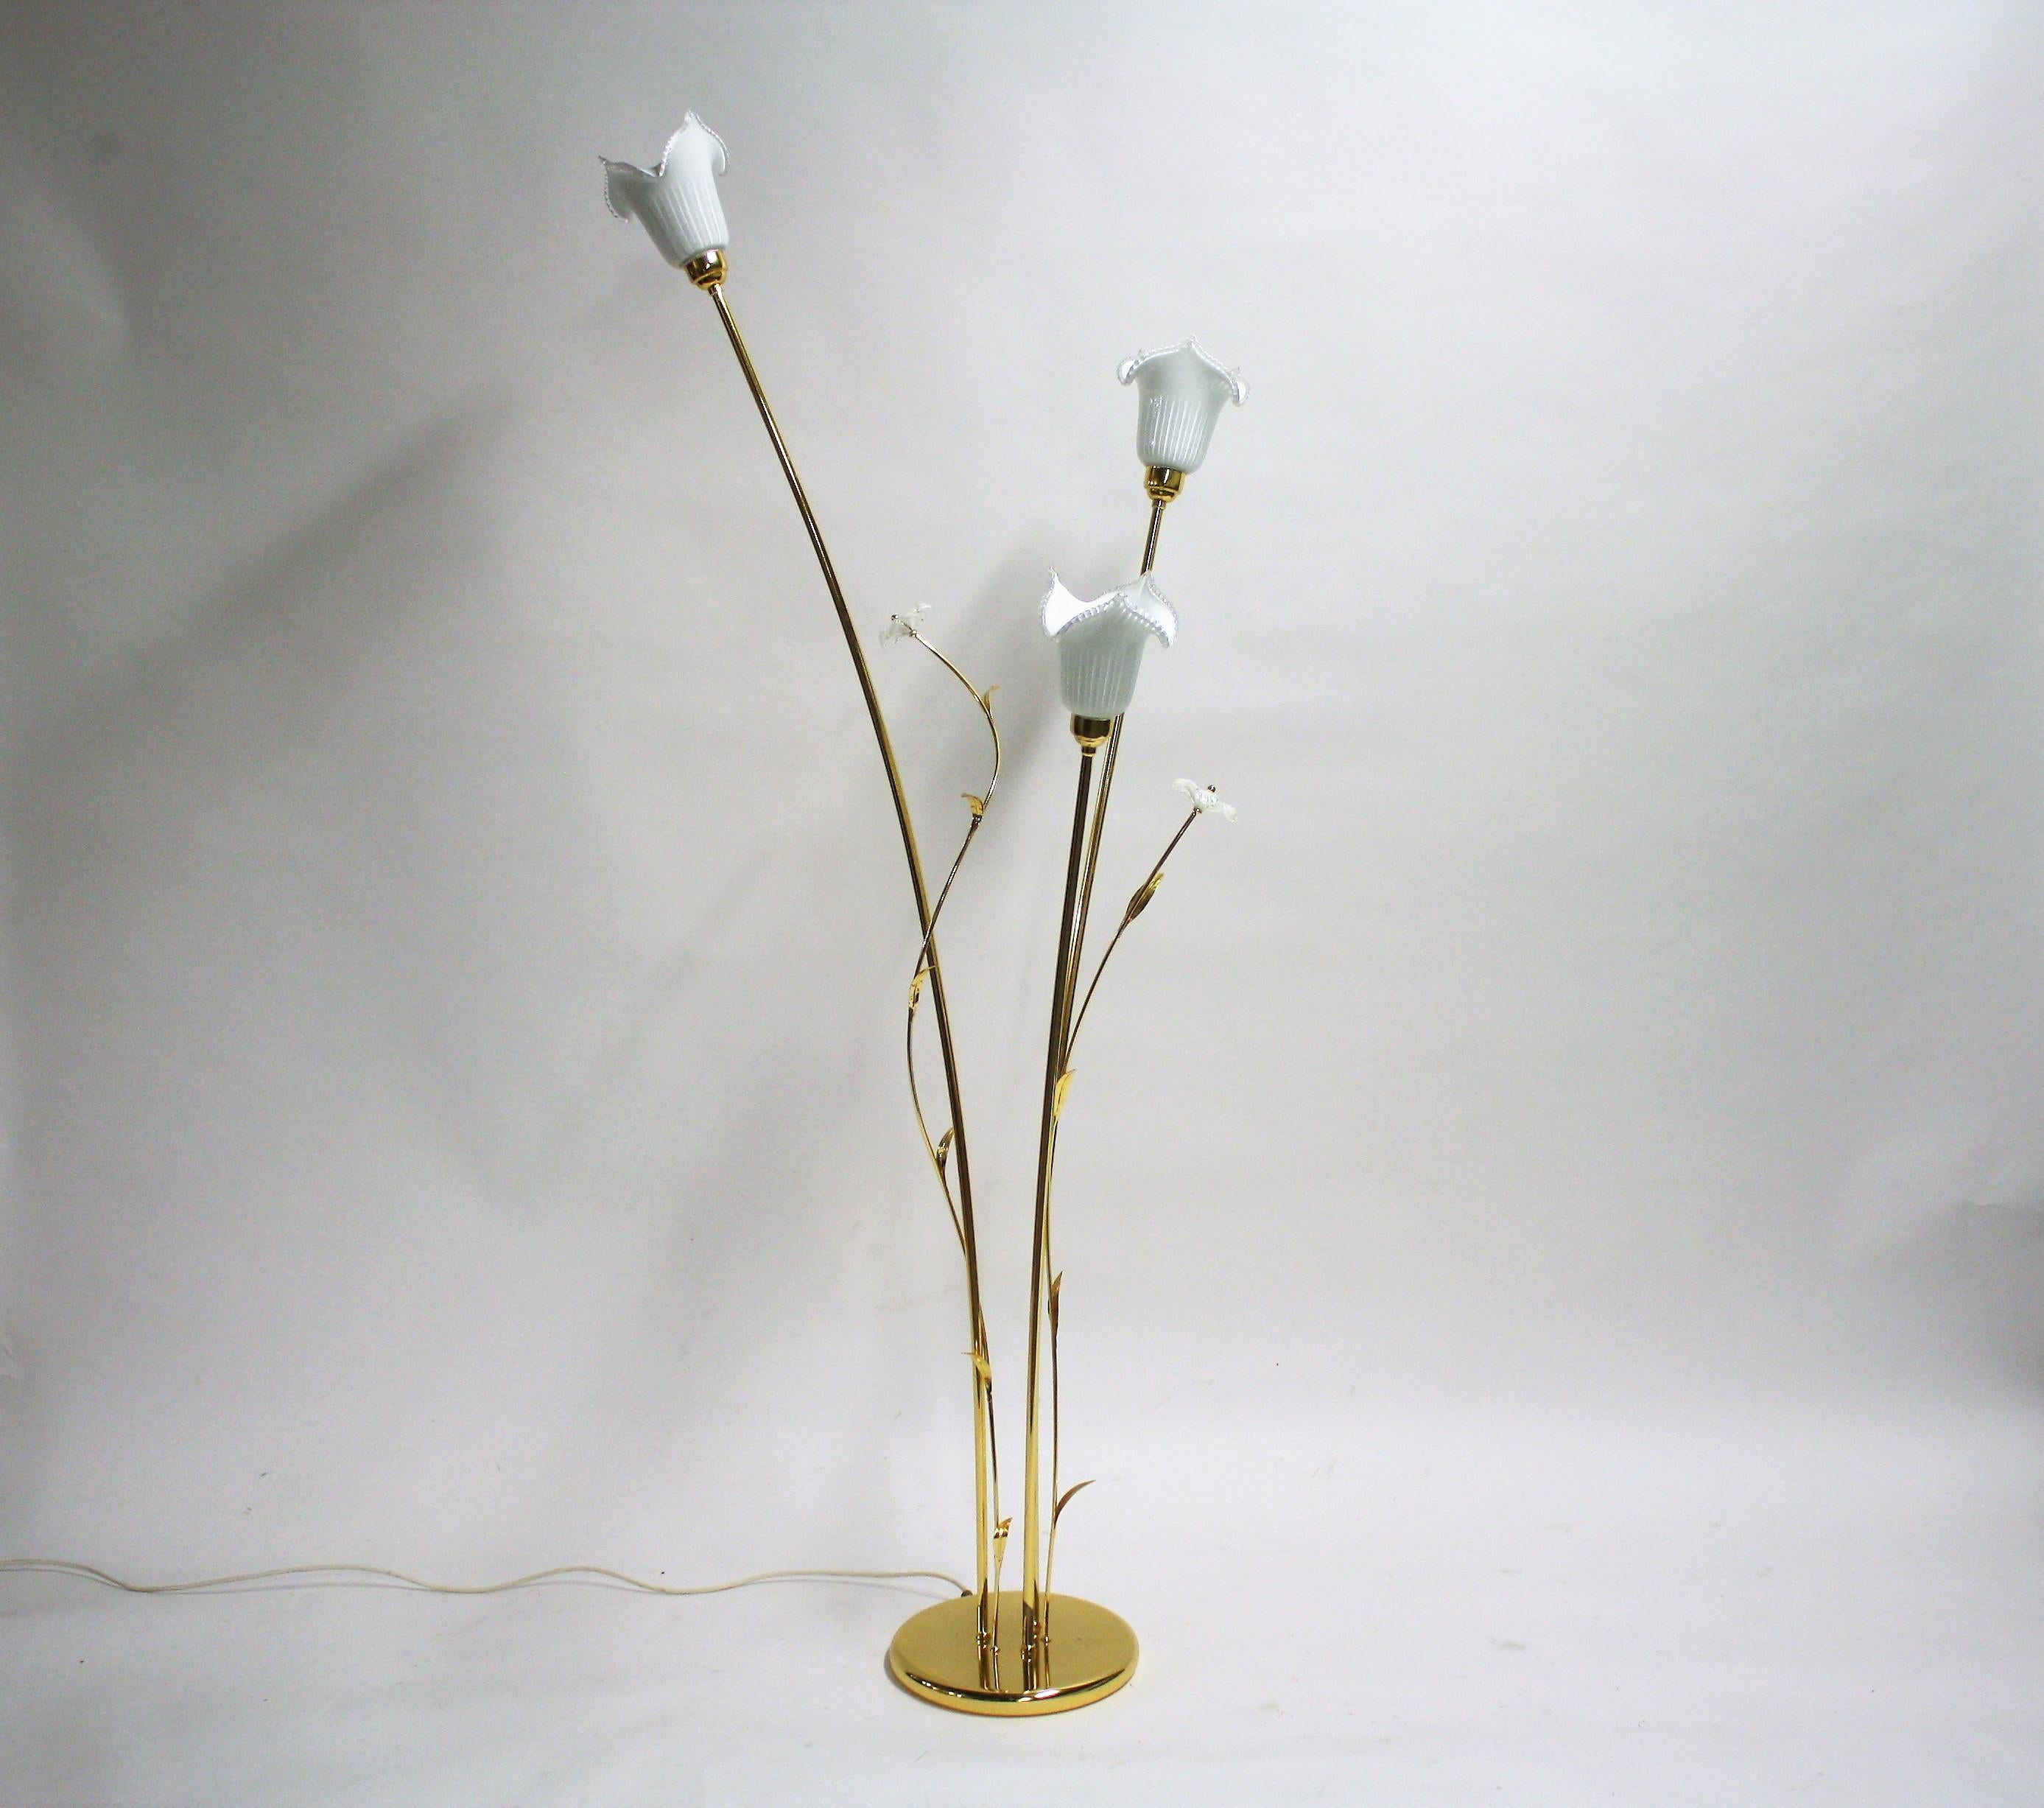 Stunning Hollywood Regency flower floor lamp.

The brass floor lamp has hand blown glass flower shades emitting a beautiful soft light.

Beautiful quality floor lamp that combines well with lots of interiors.

Tested and ready for use. Works